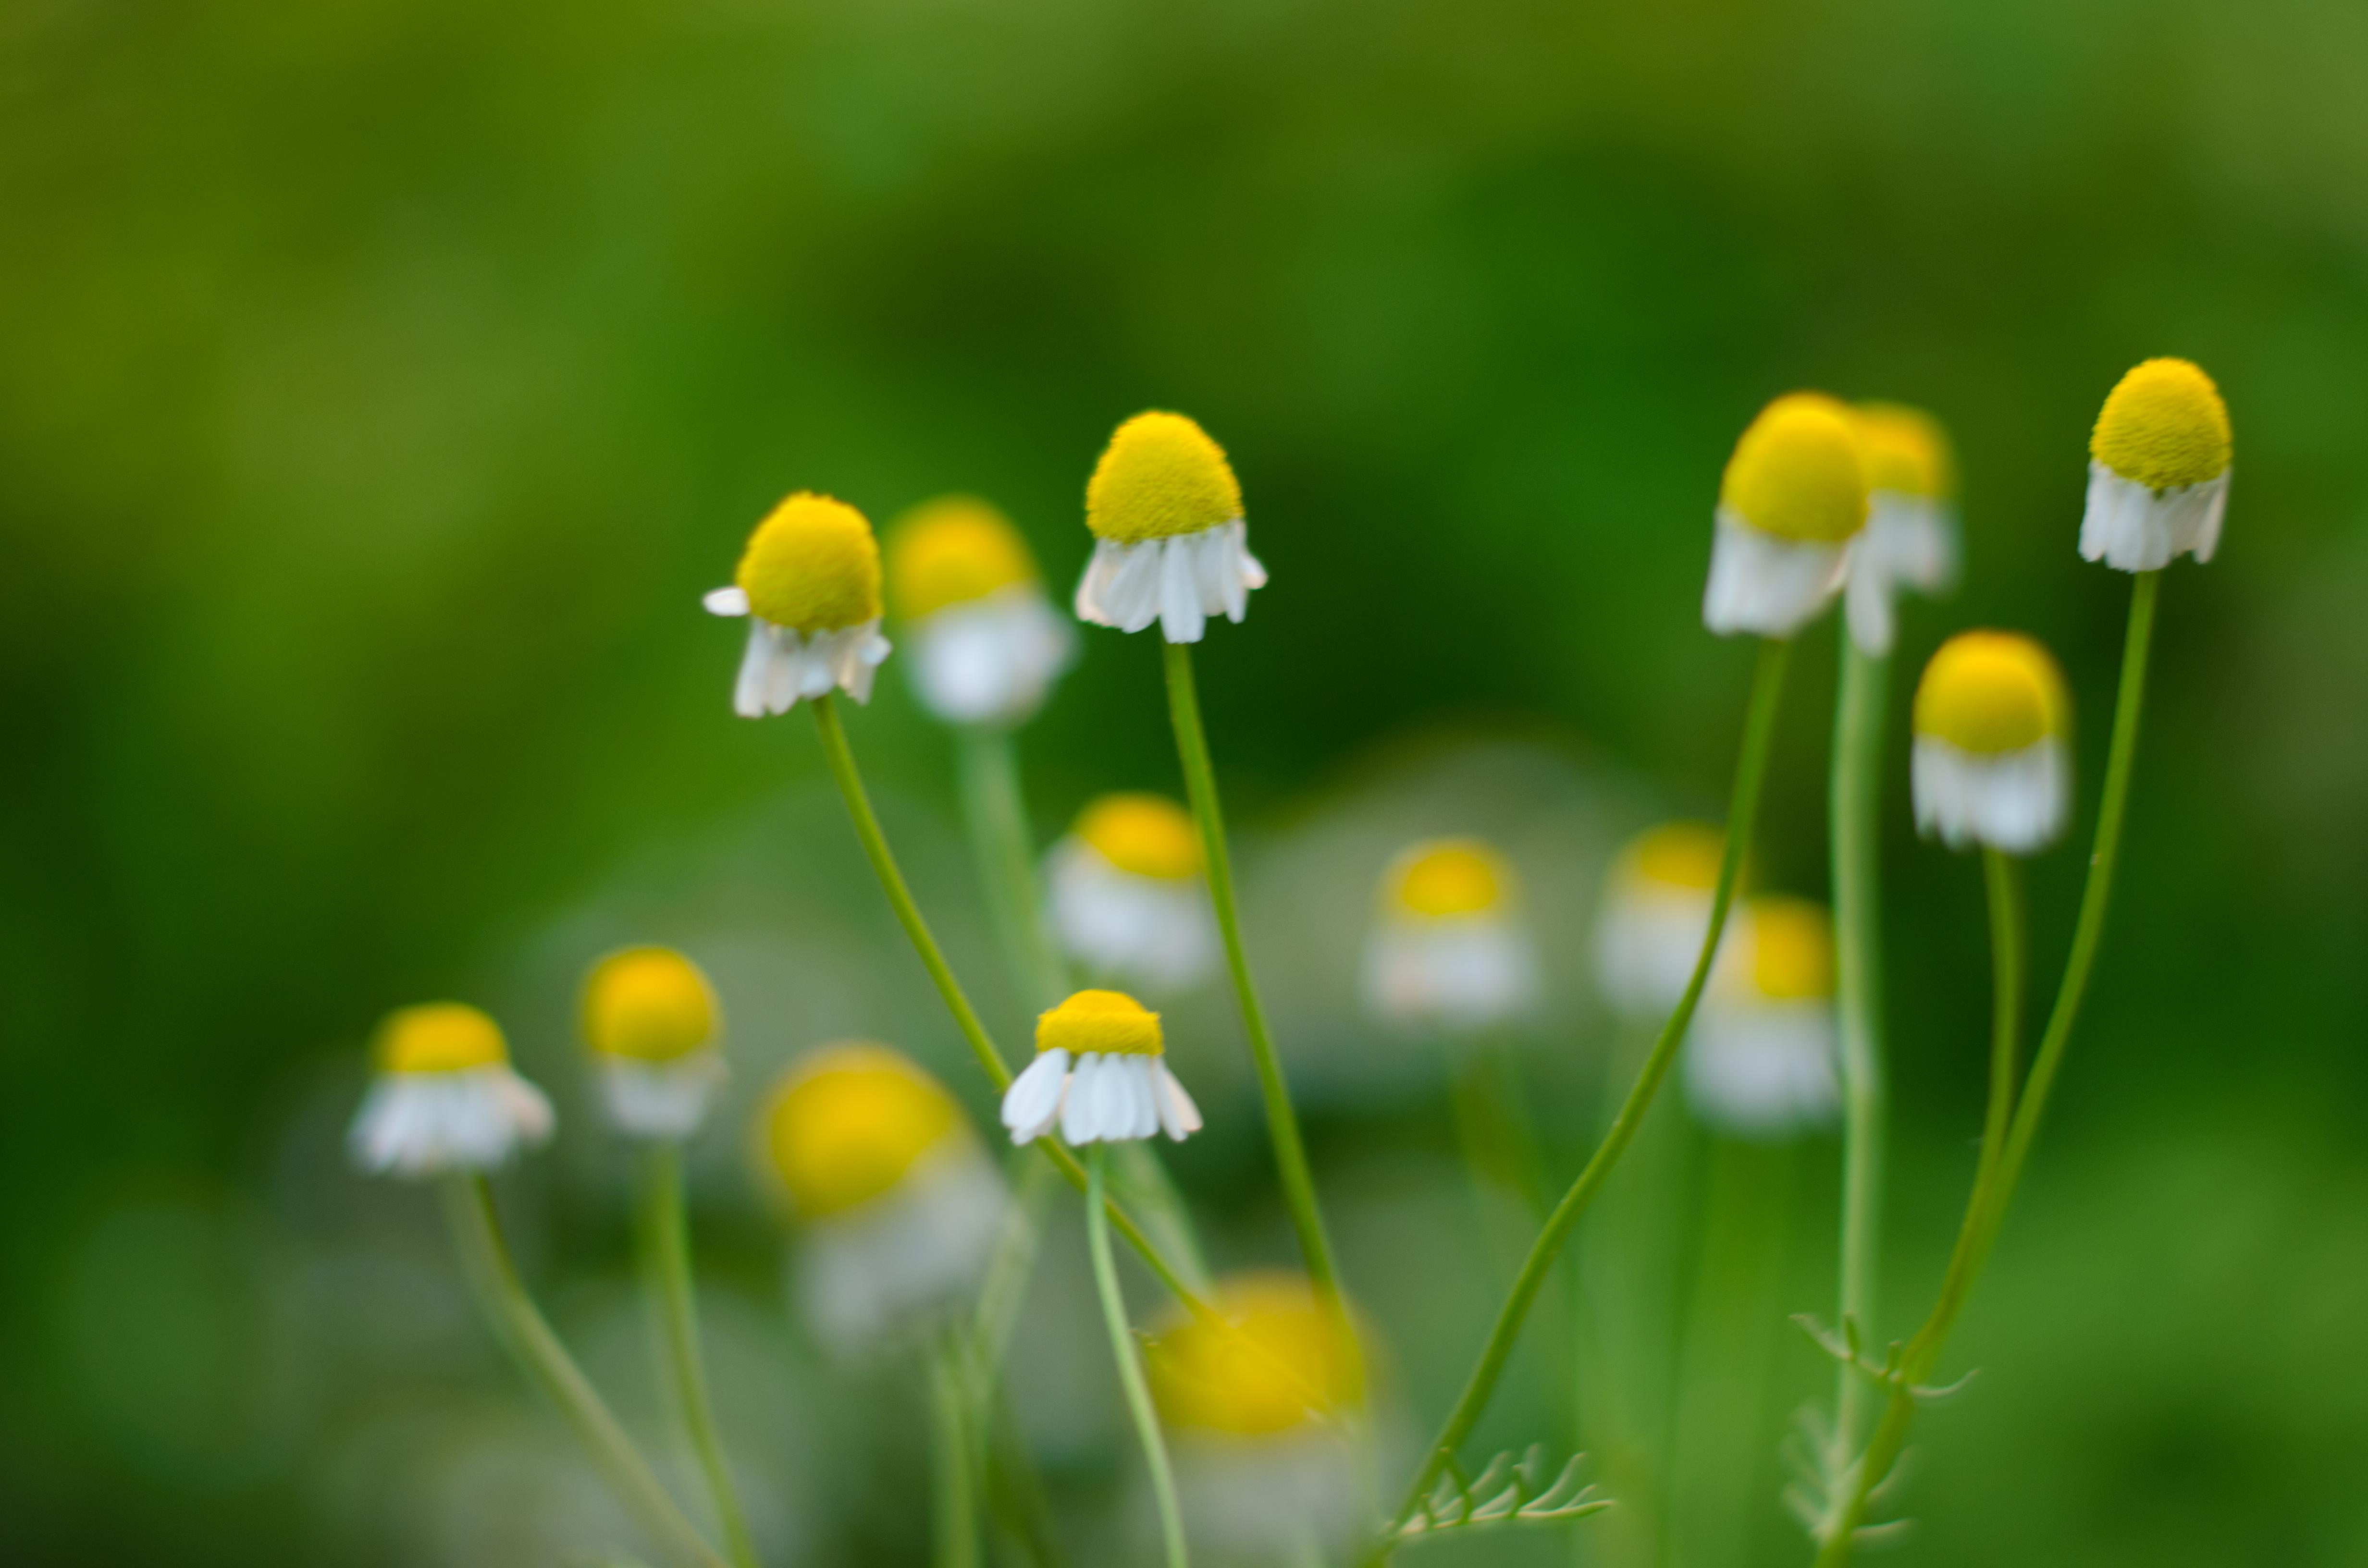 A picture of some chamomile flowers with a green background